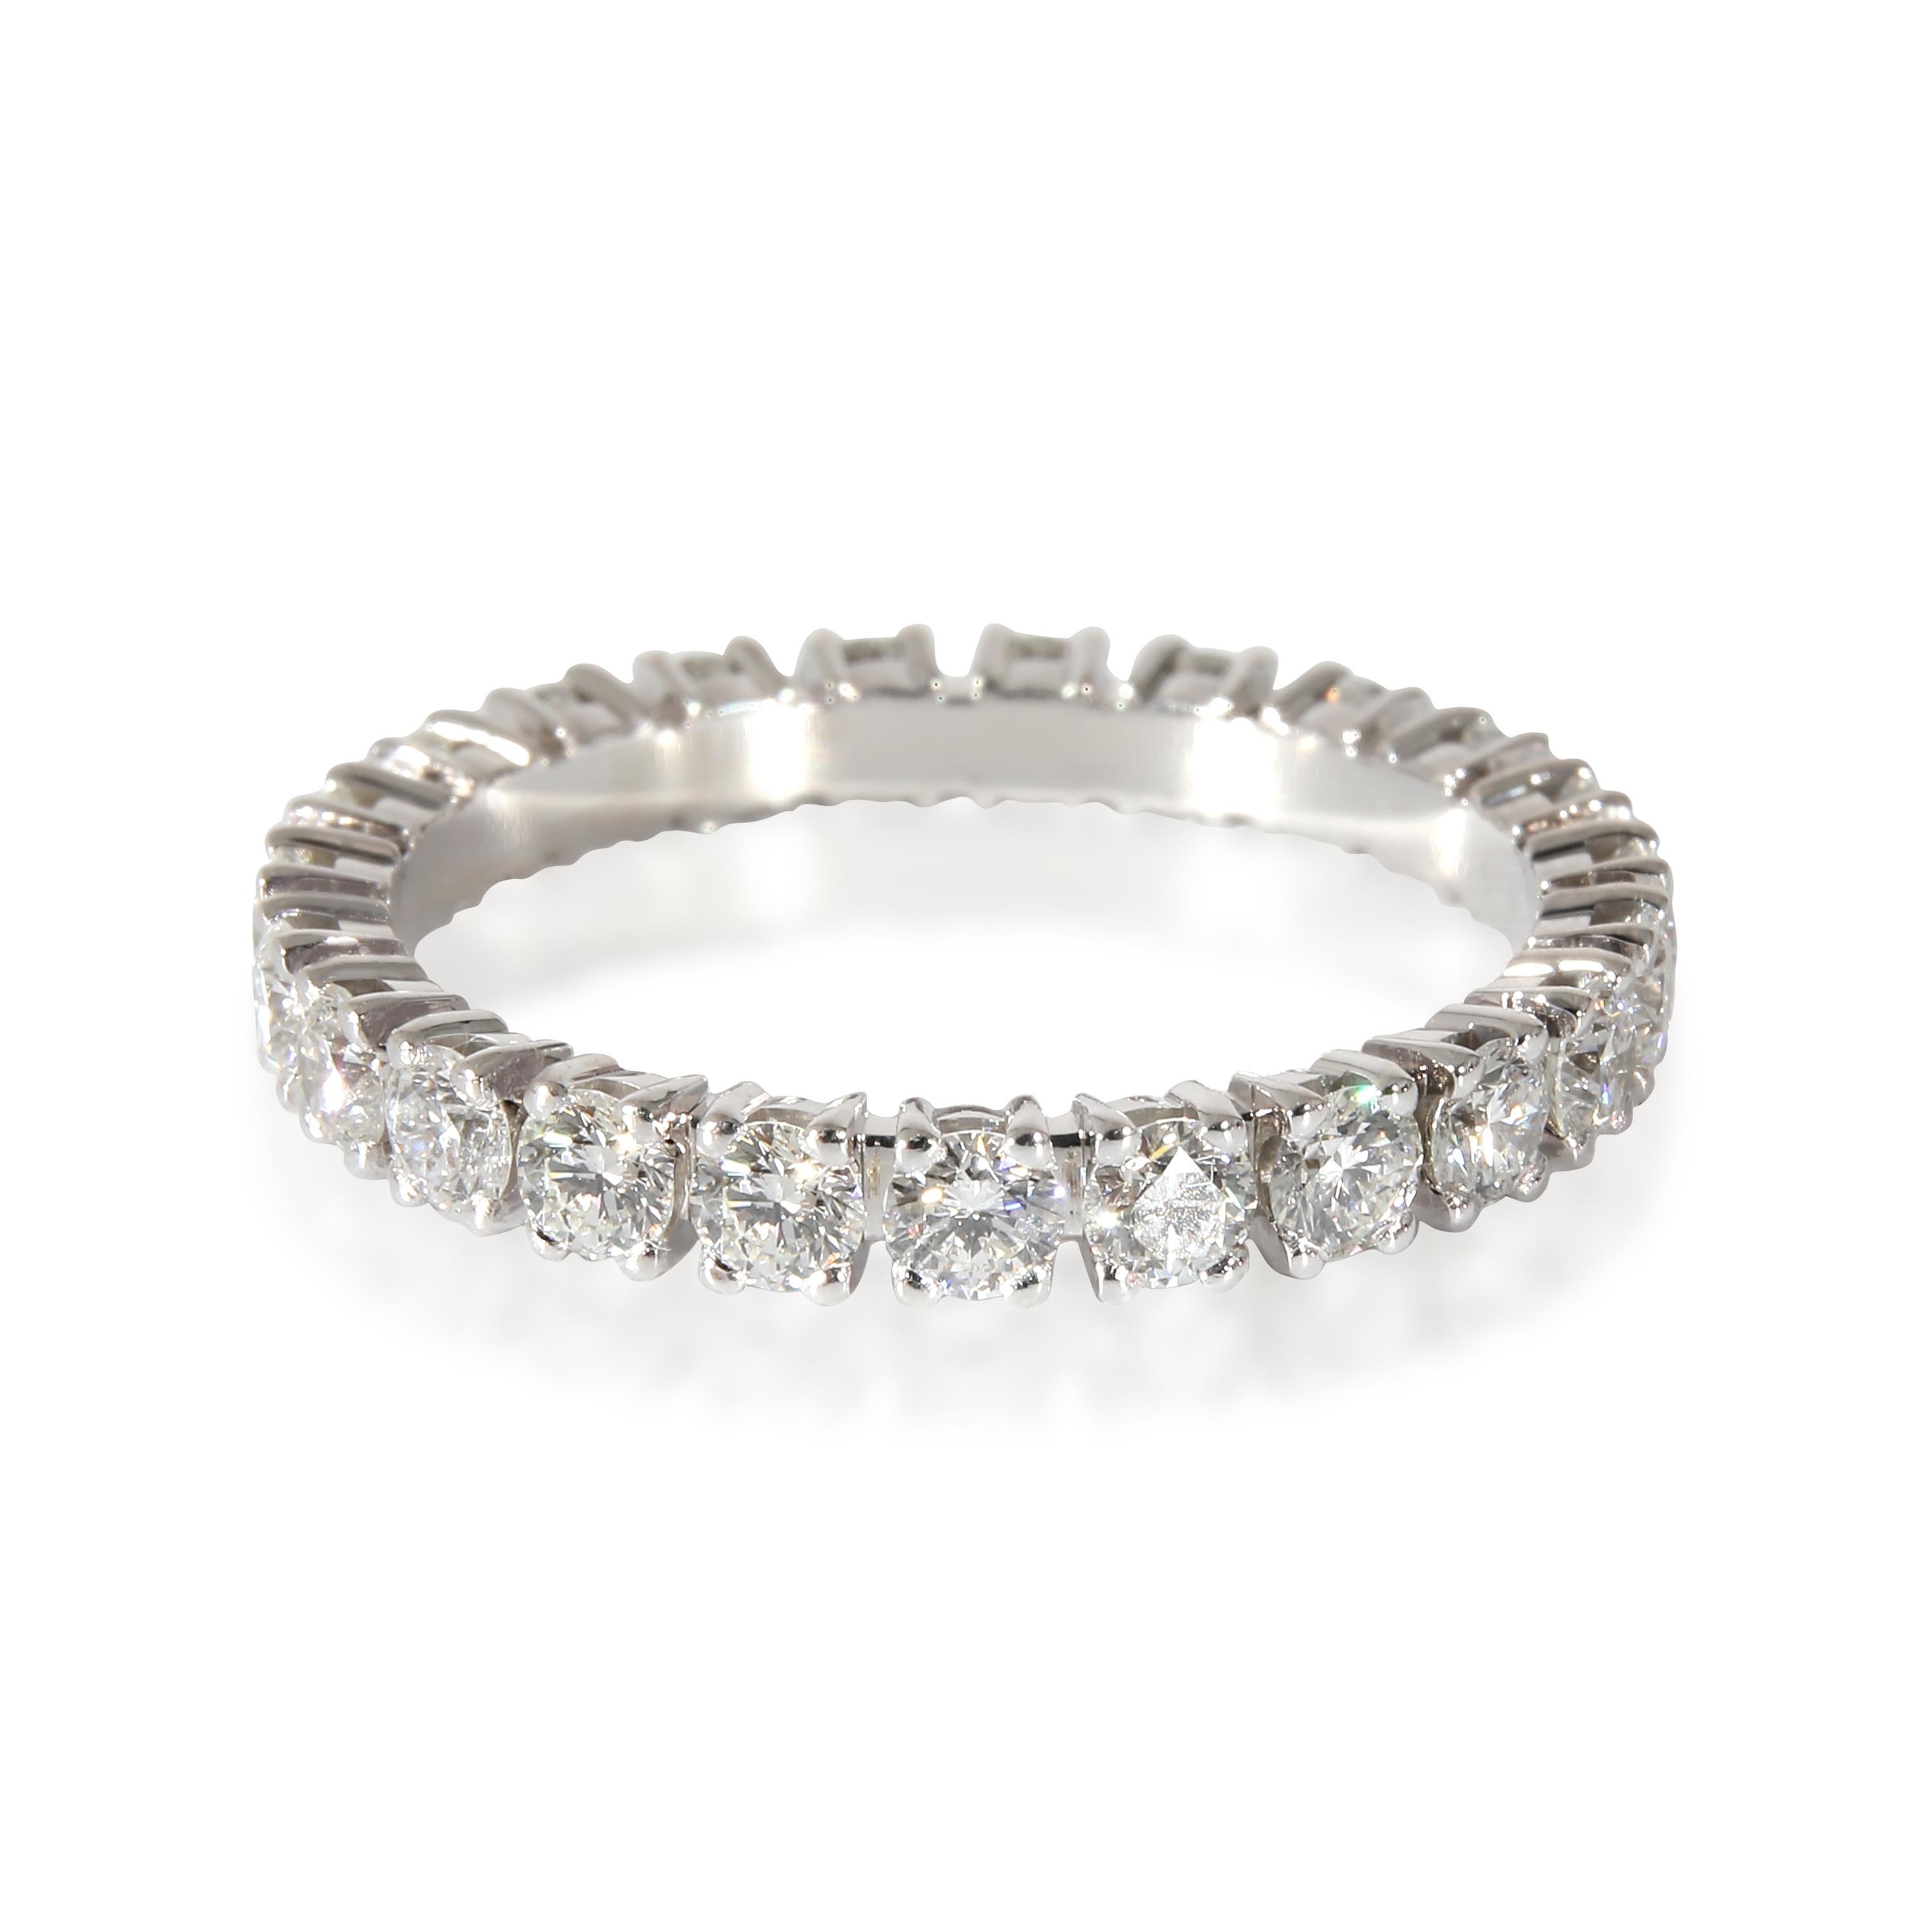 Cartier Destinee Diamond Eternity Band in Platinum 1.34 CTW

PRIMARY DETAILS
SKU: 133473
Listing Title: Cartier Destinee Diamond Eternity Band in Platinum 1.34 CTW
Condition Description: Retails for 12200 USD. In excellent condition and recently